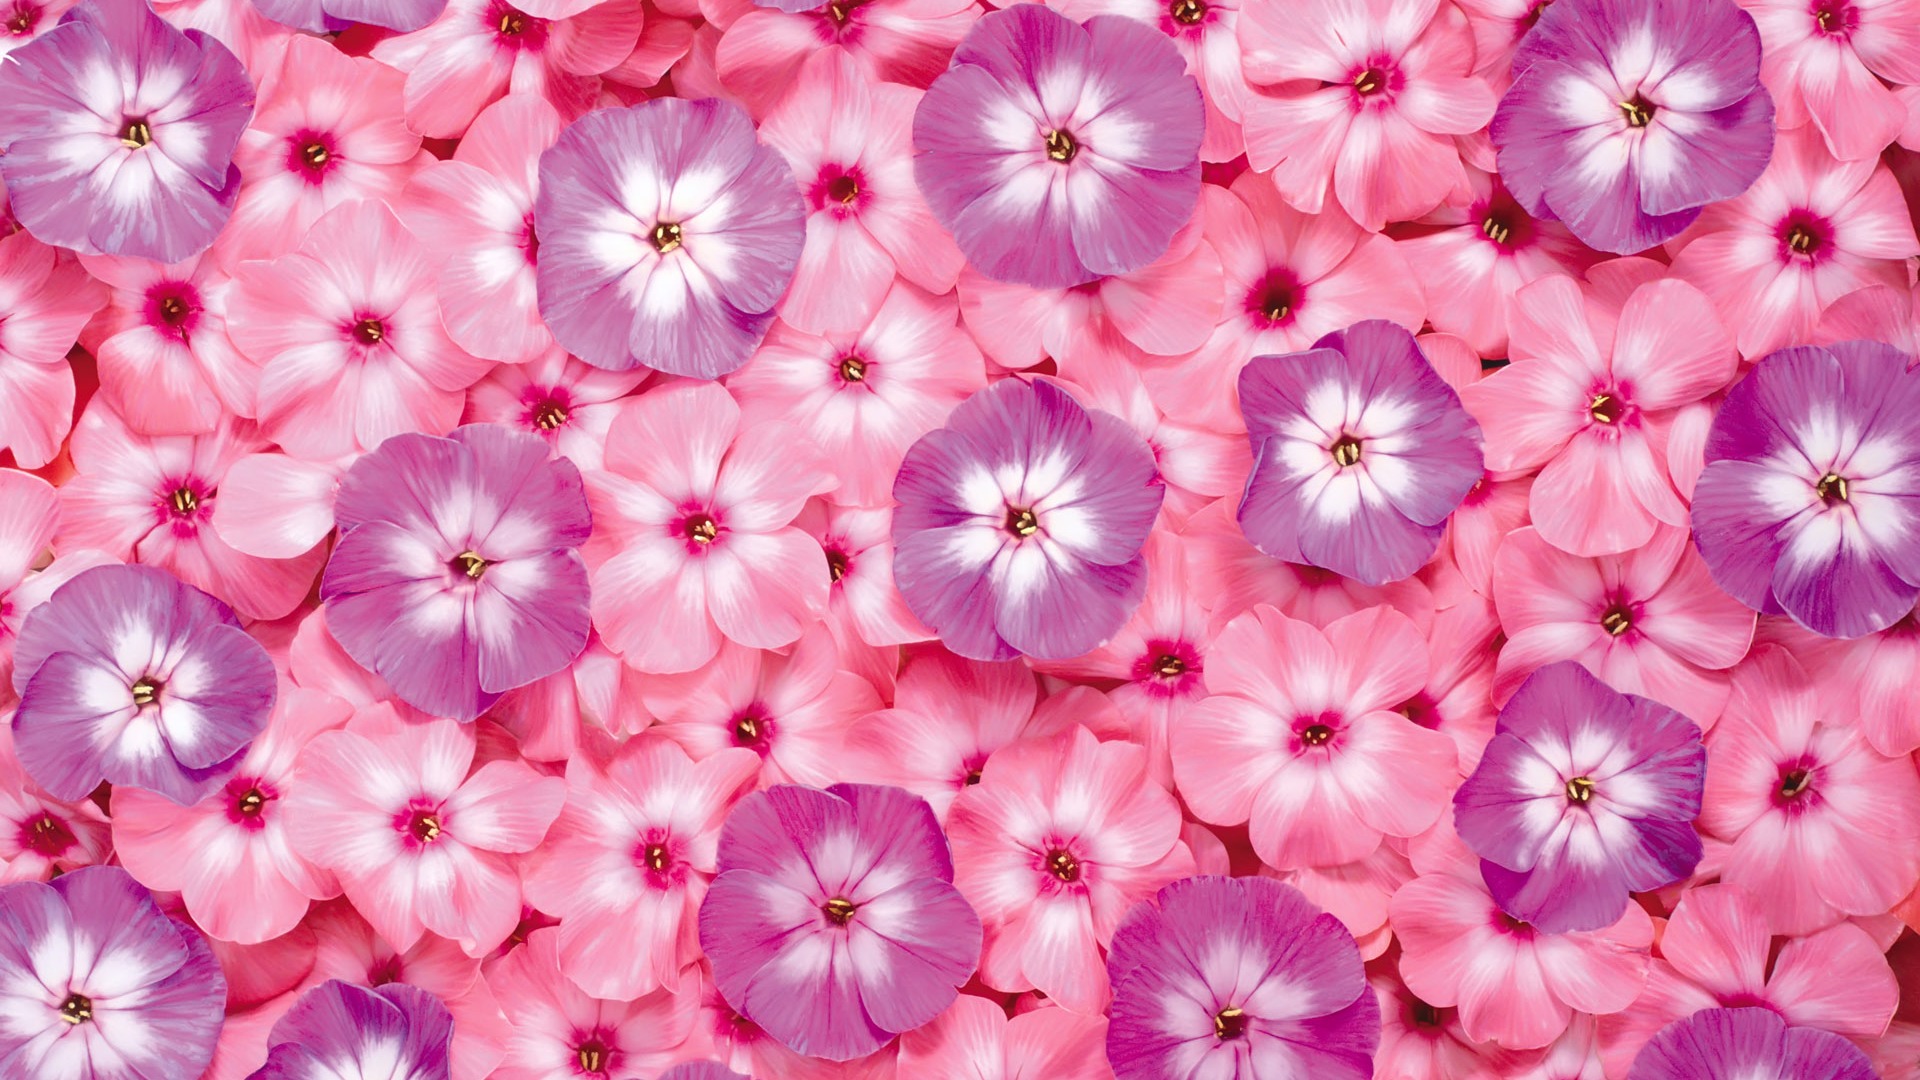 Surrounded by stunning flowers wallpaper #5 - 1920x1080